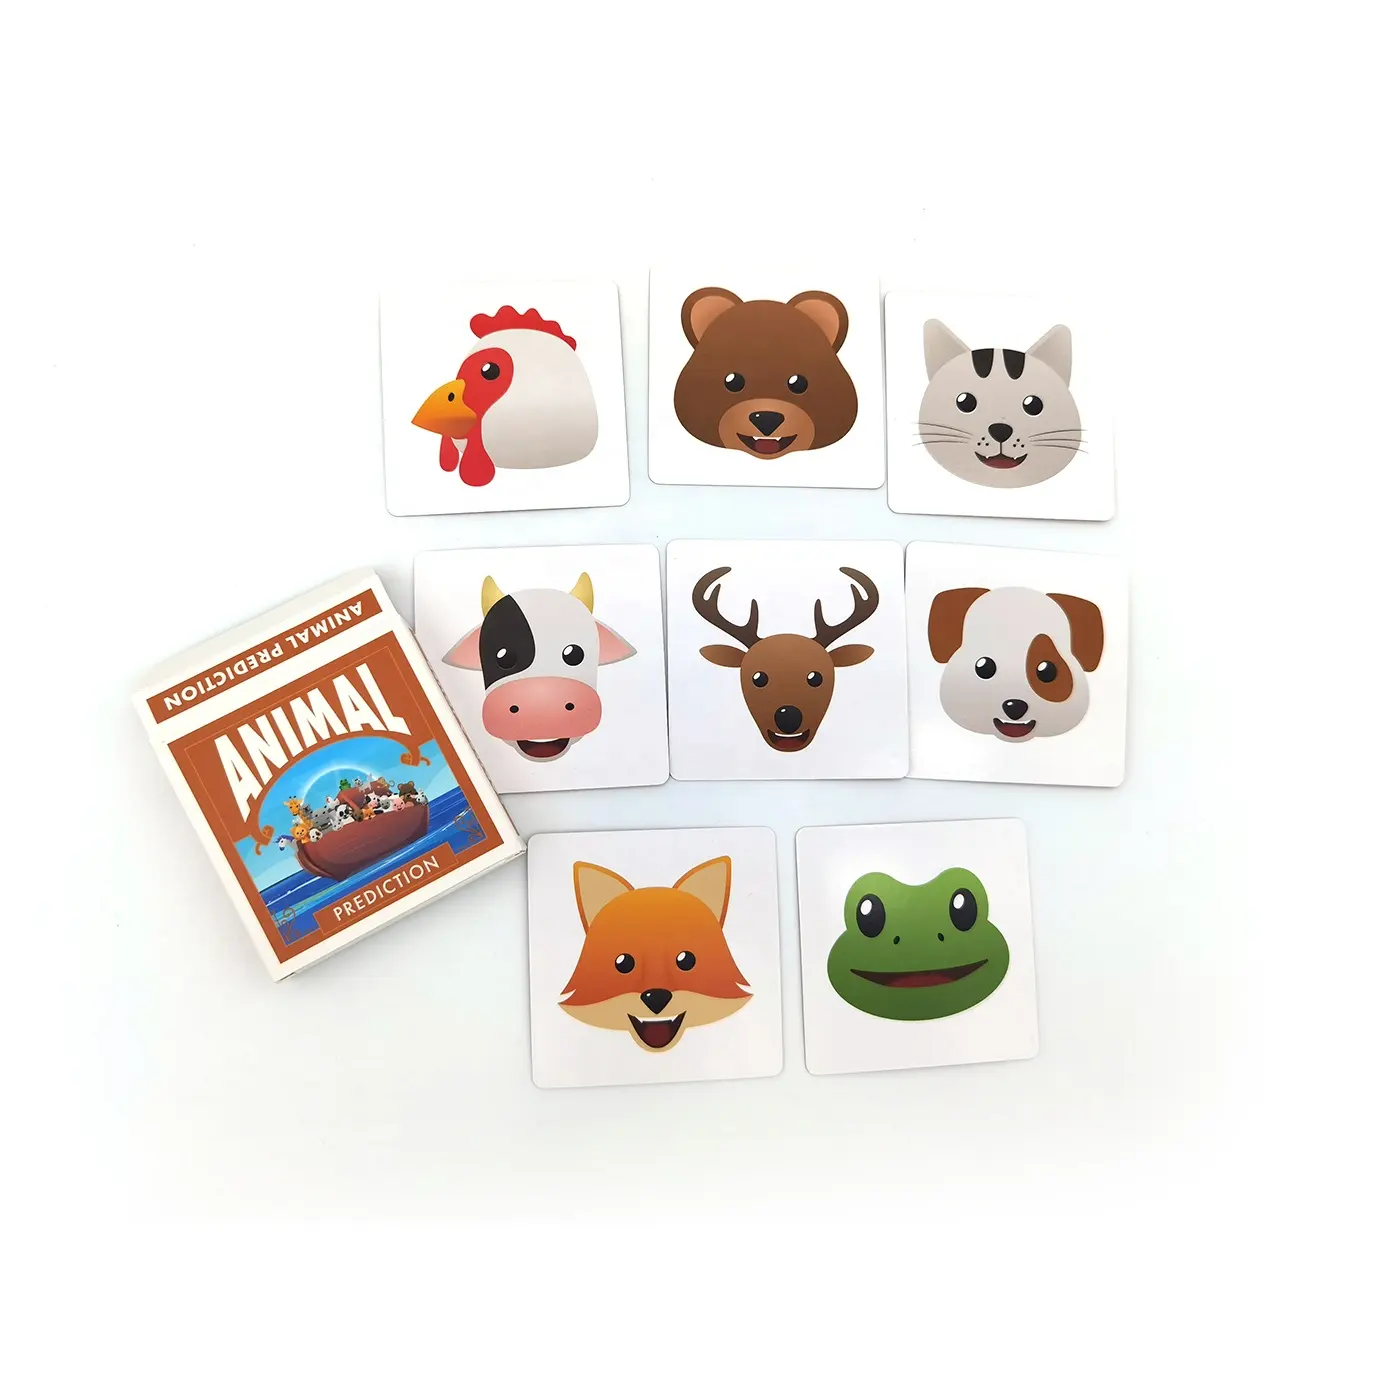 Different image Matt varnishing learning cards Small size cute animal flash card for kids